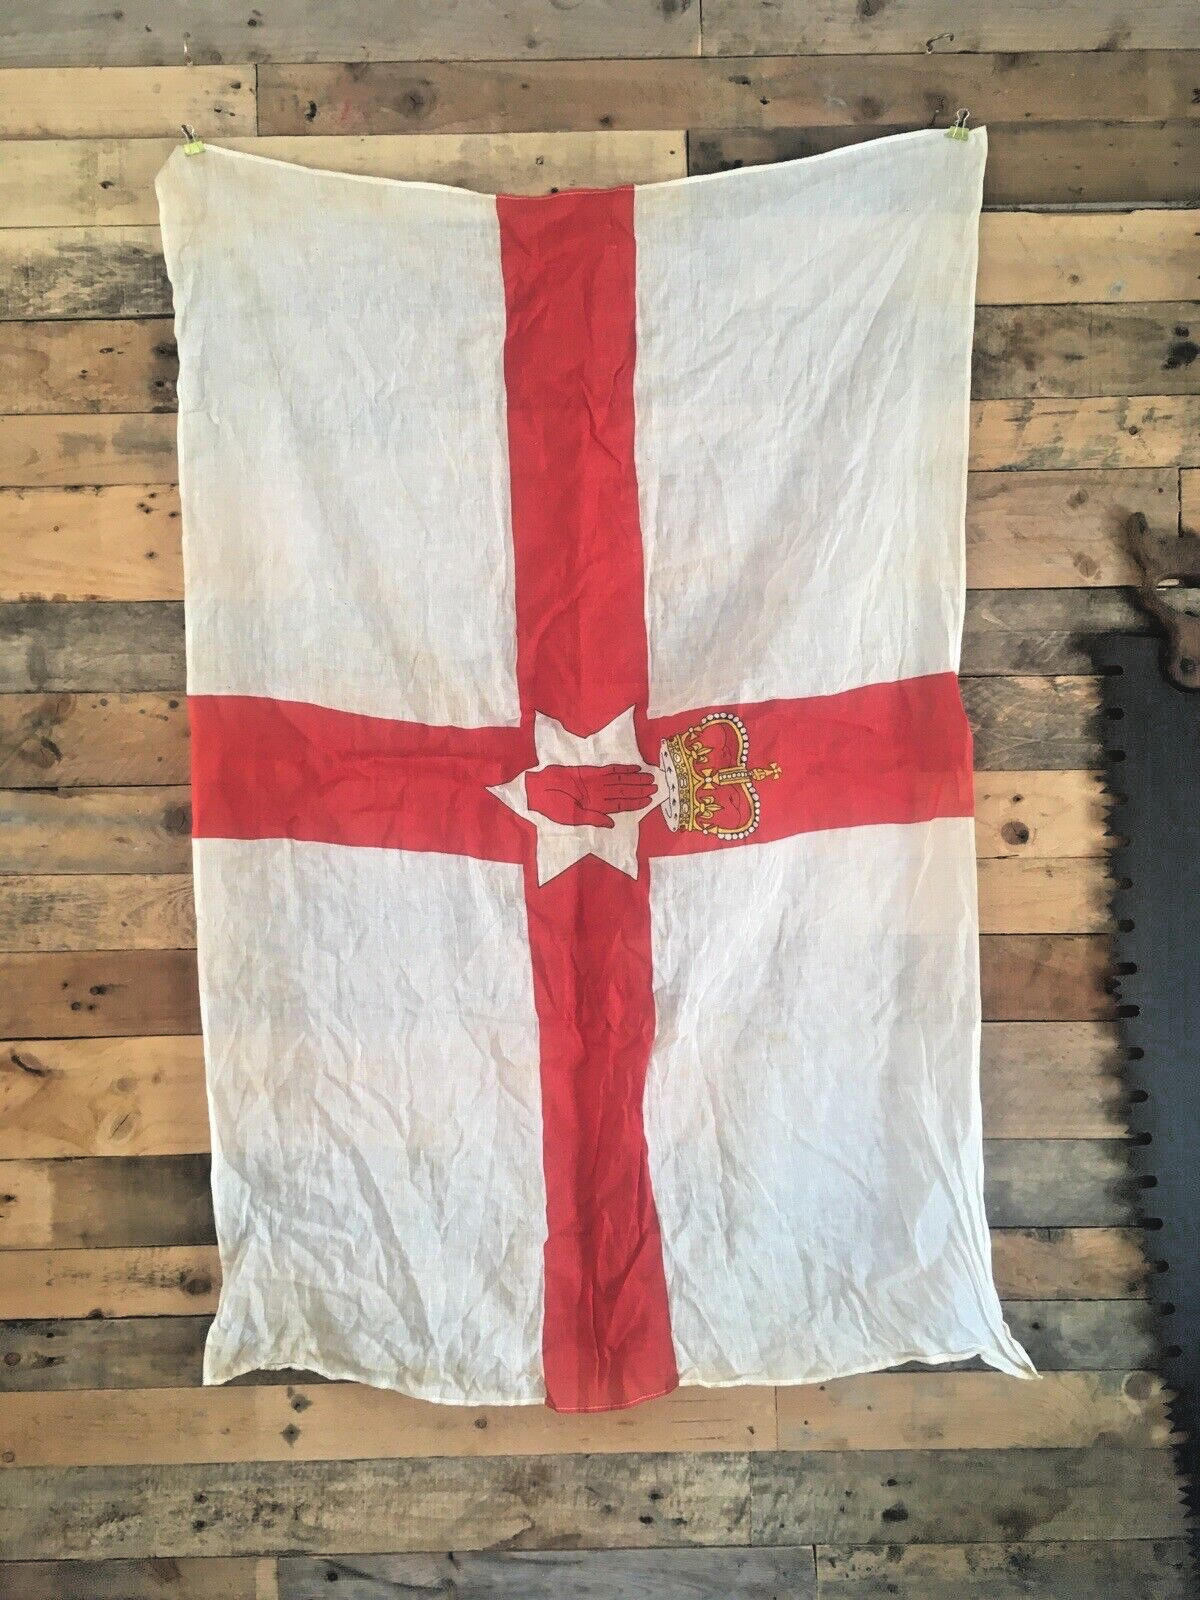 RARE ANTIQUE LARGE 4FT  NORTHERN IRELAND FLAG THE ULSTER BANNER WALL HANGING